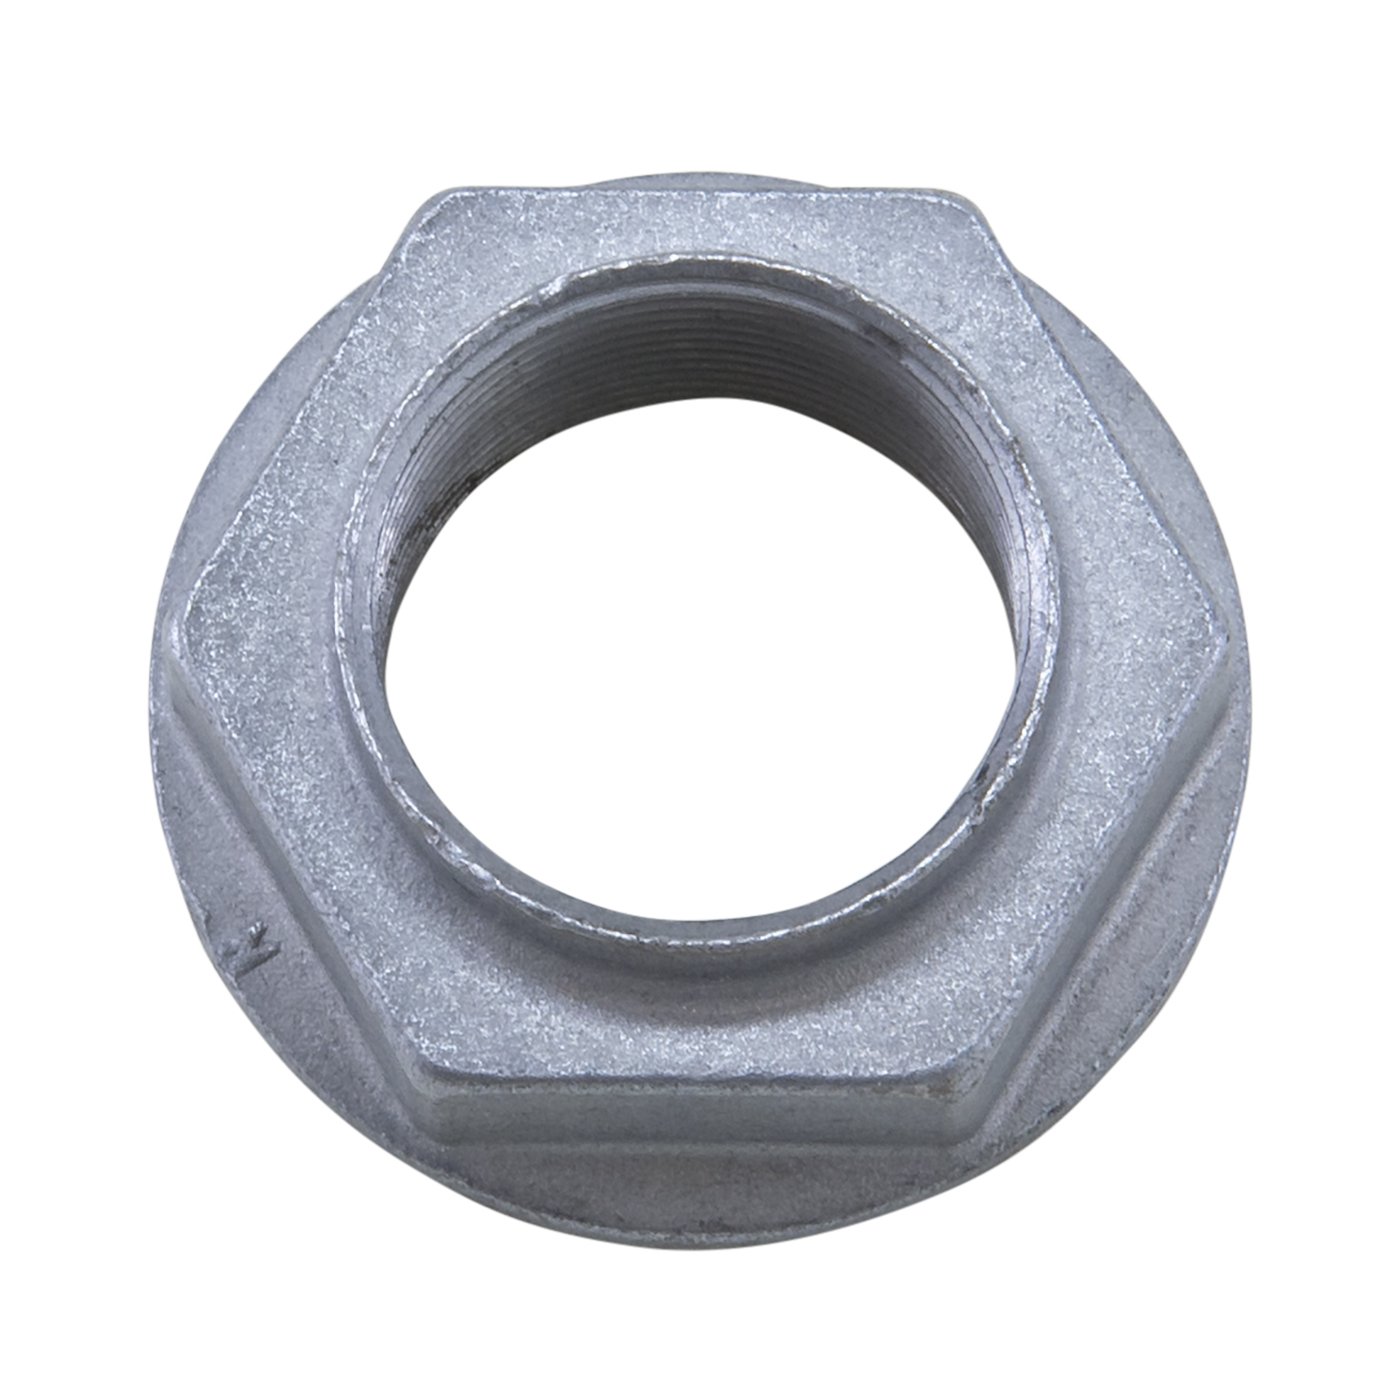 Pinion nut for Chrysler 300, Charger, Magnum. 